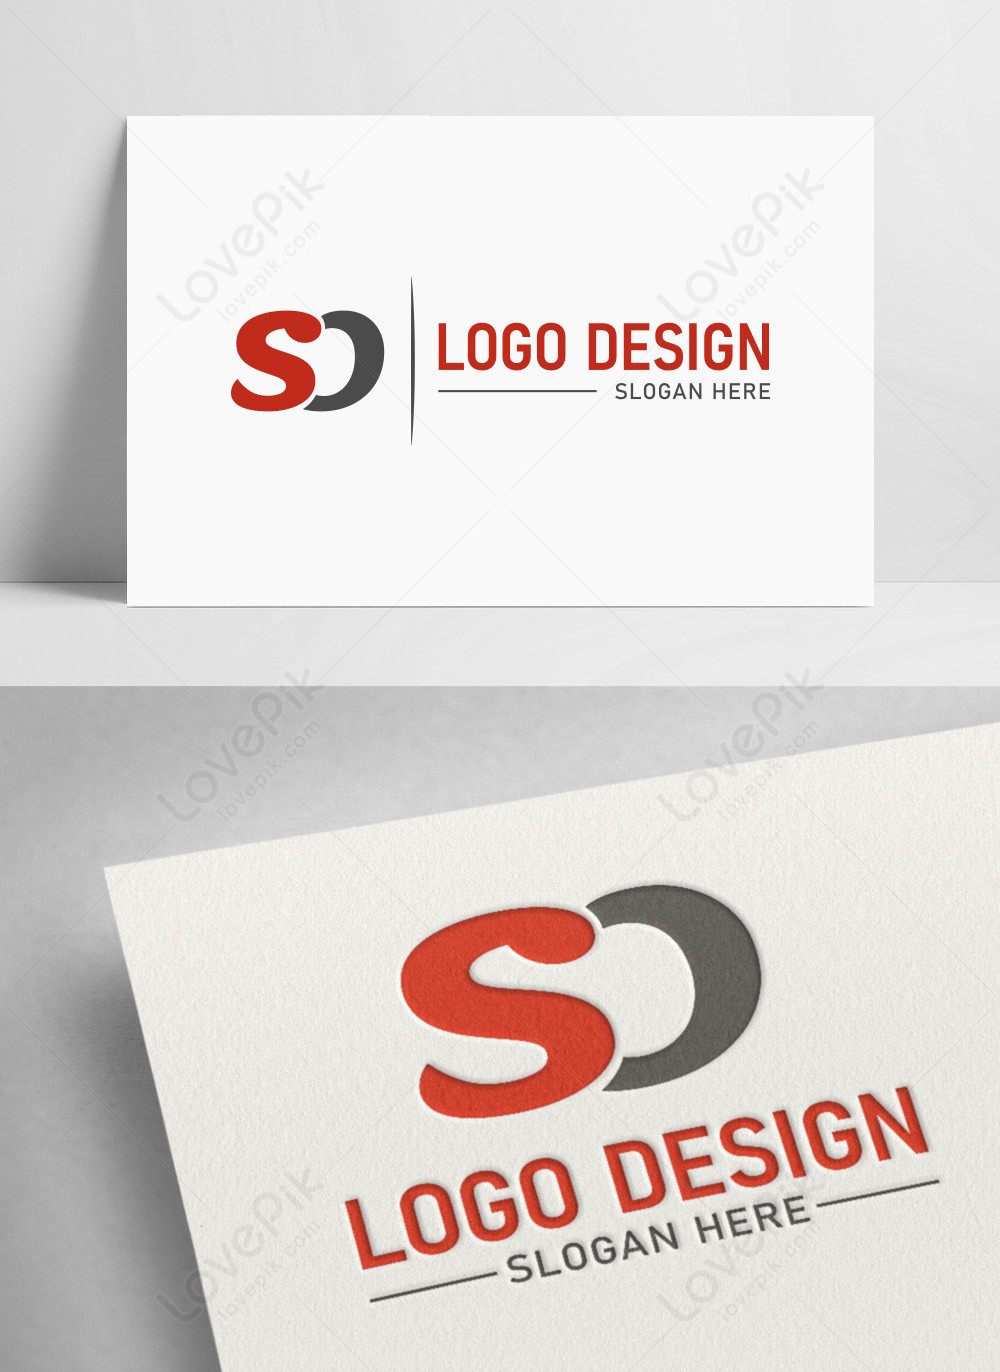 Letter sd logo template image_picture free download 450110775_lovepik.com